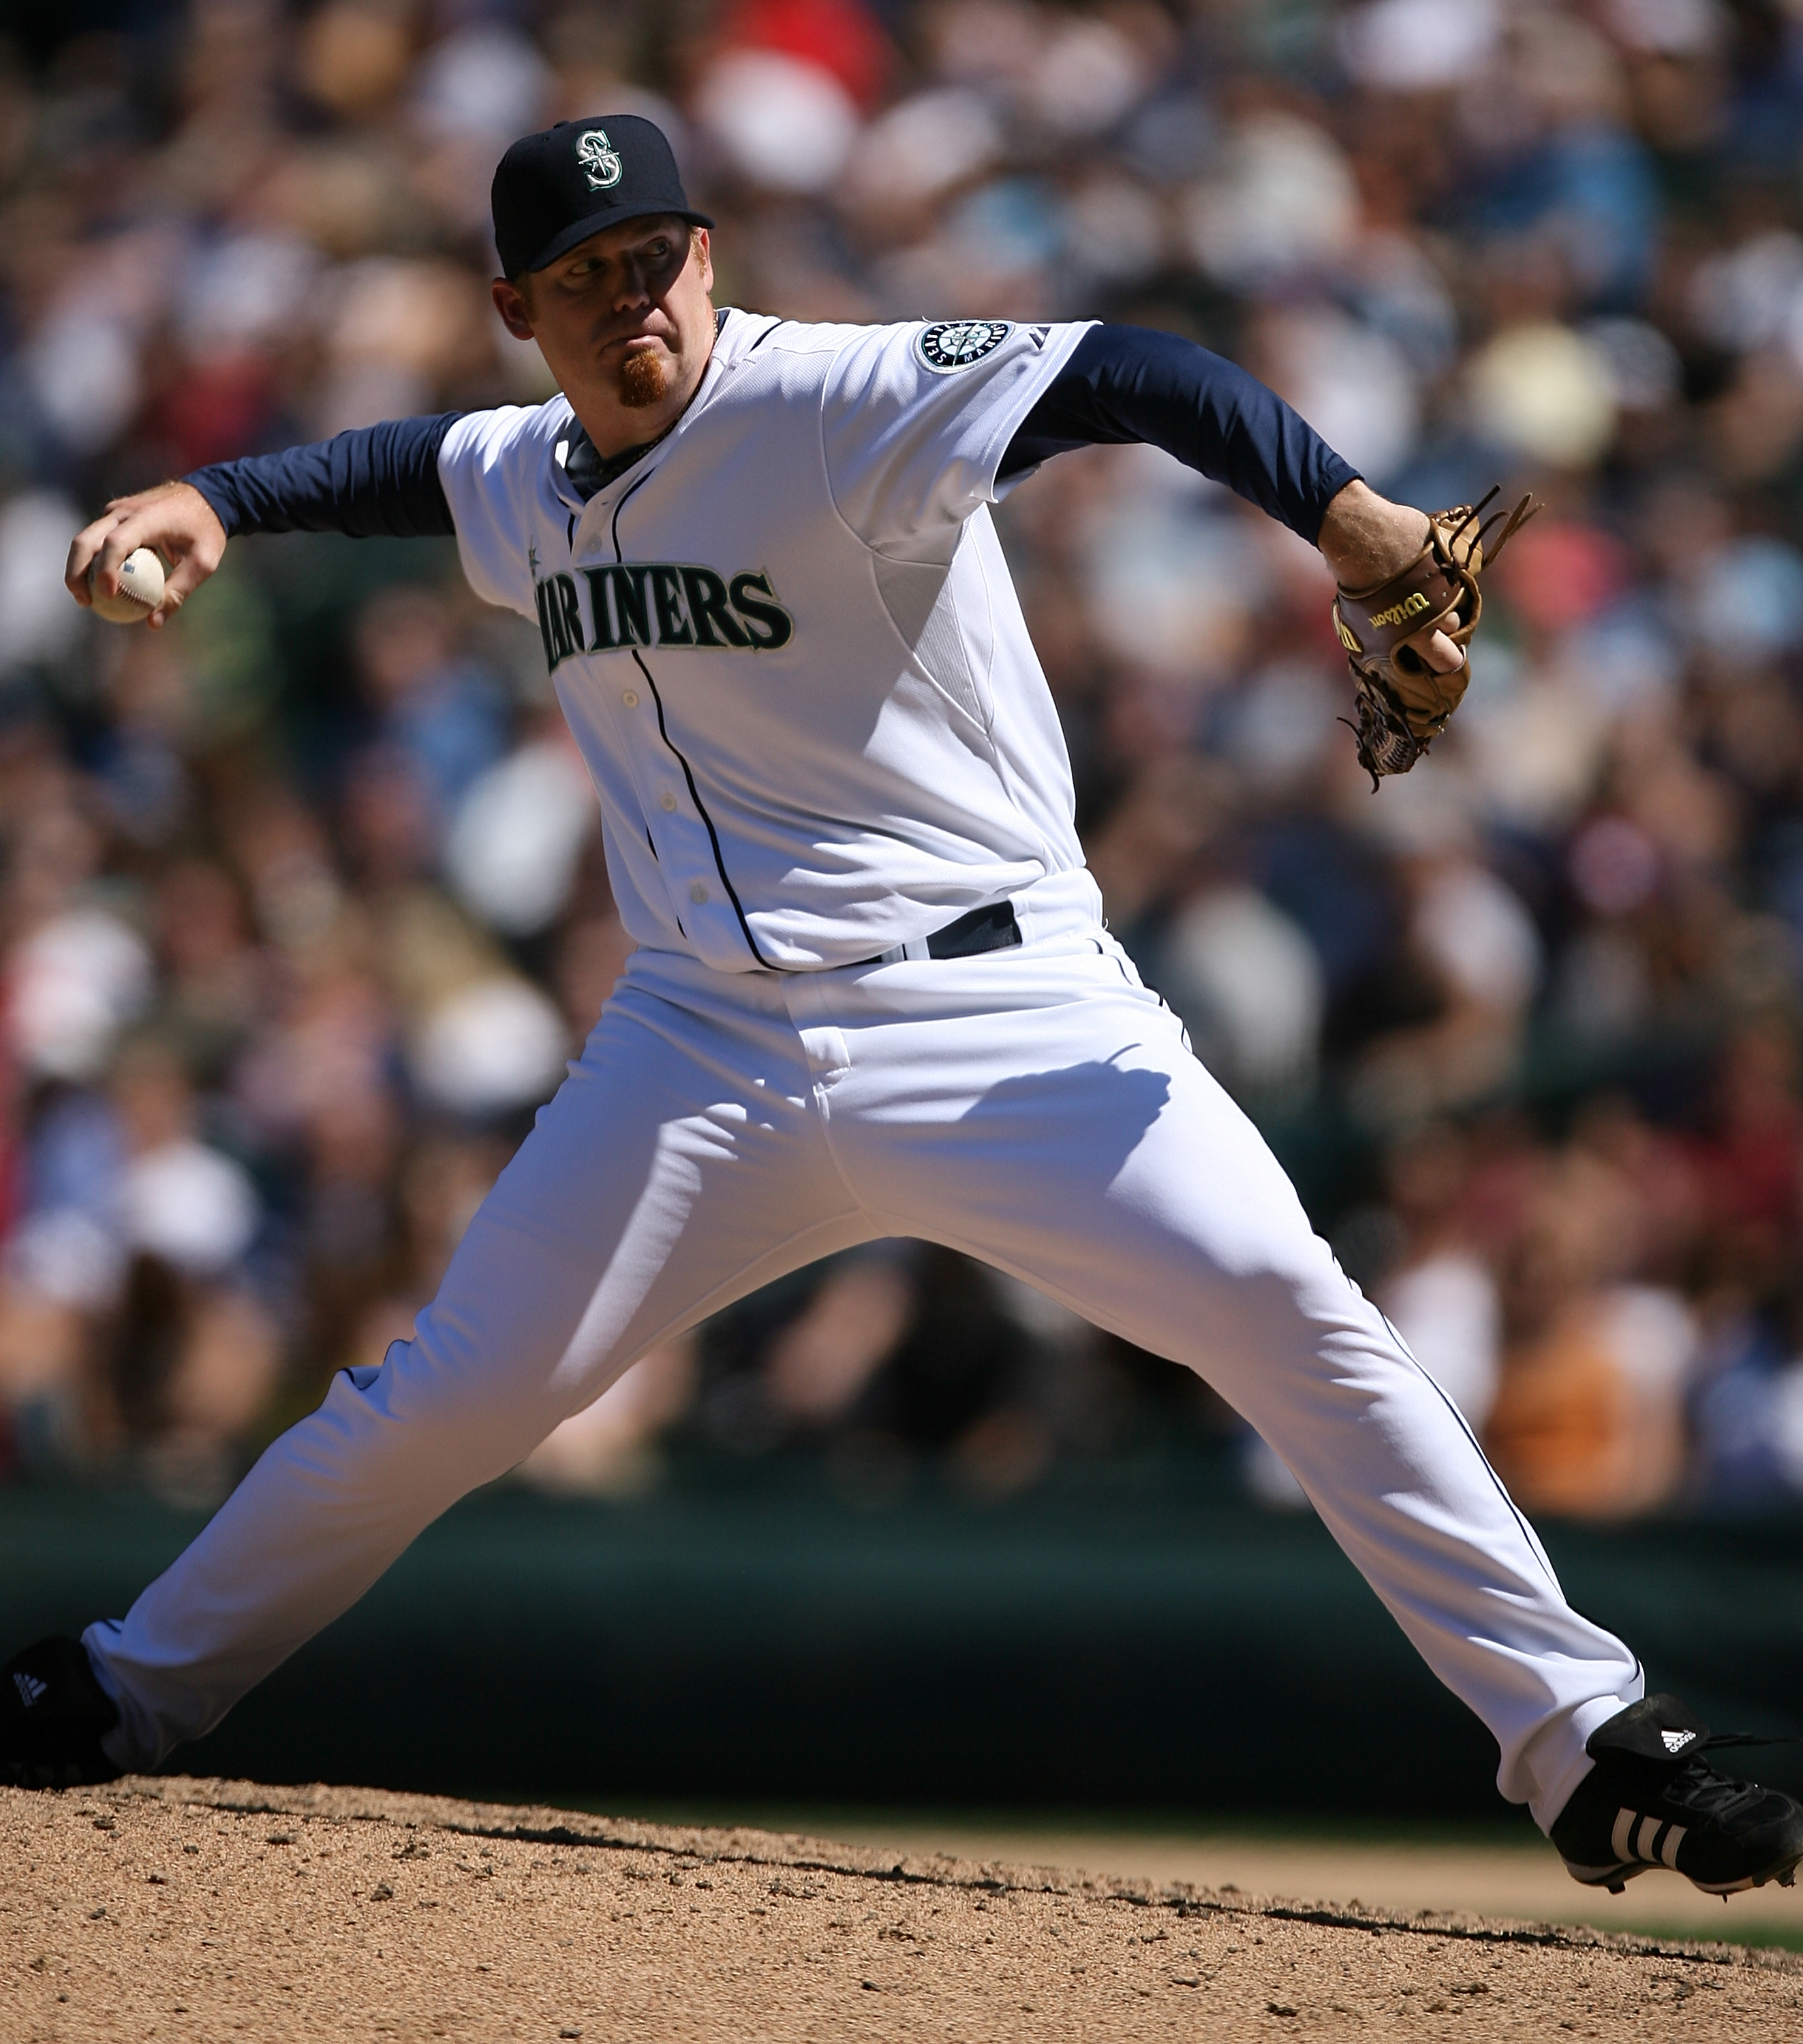 SEATTLE - JULY 20:  J.J. Putz #20 of the Seattle Mariners pitches against the Cleveland Indians on July 20, 2008 at Safeco Field in Seattle, Washington. (Photo by Otto Greule Jr/Getty Images)